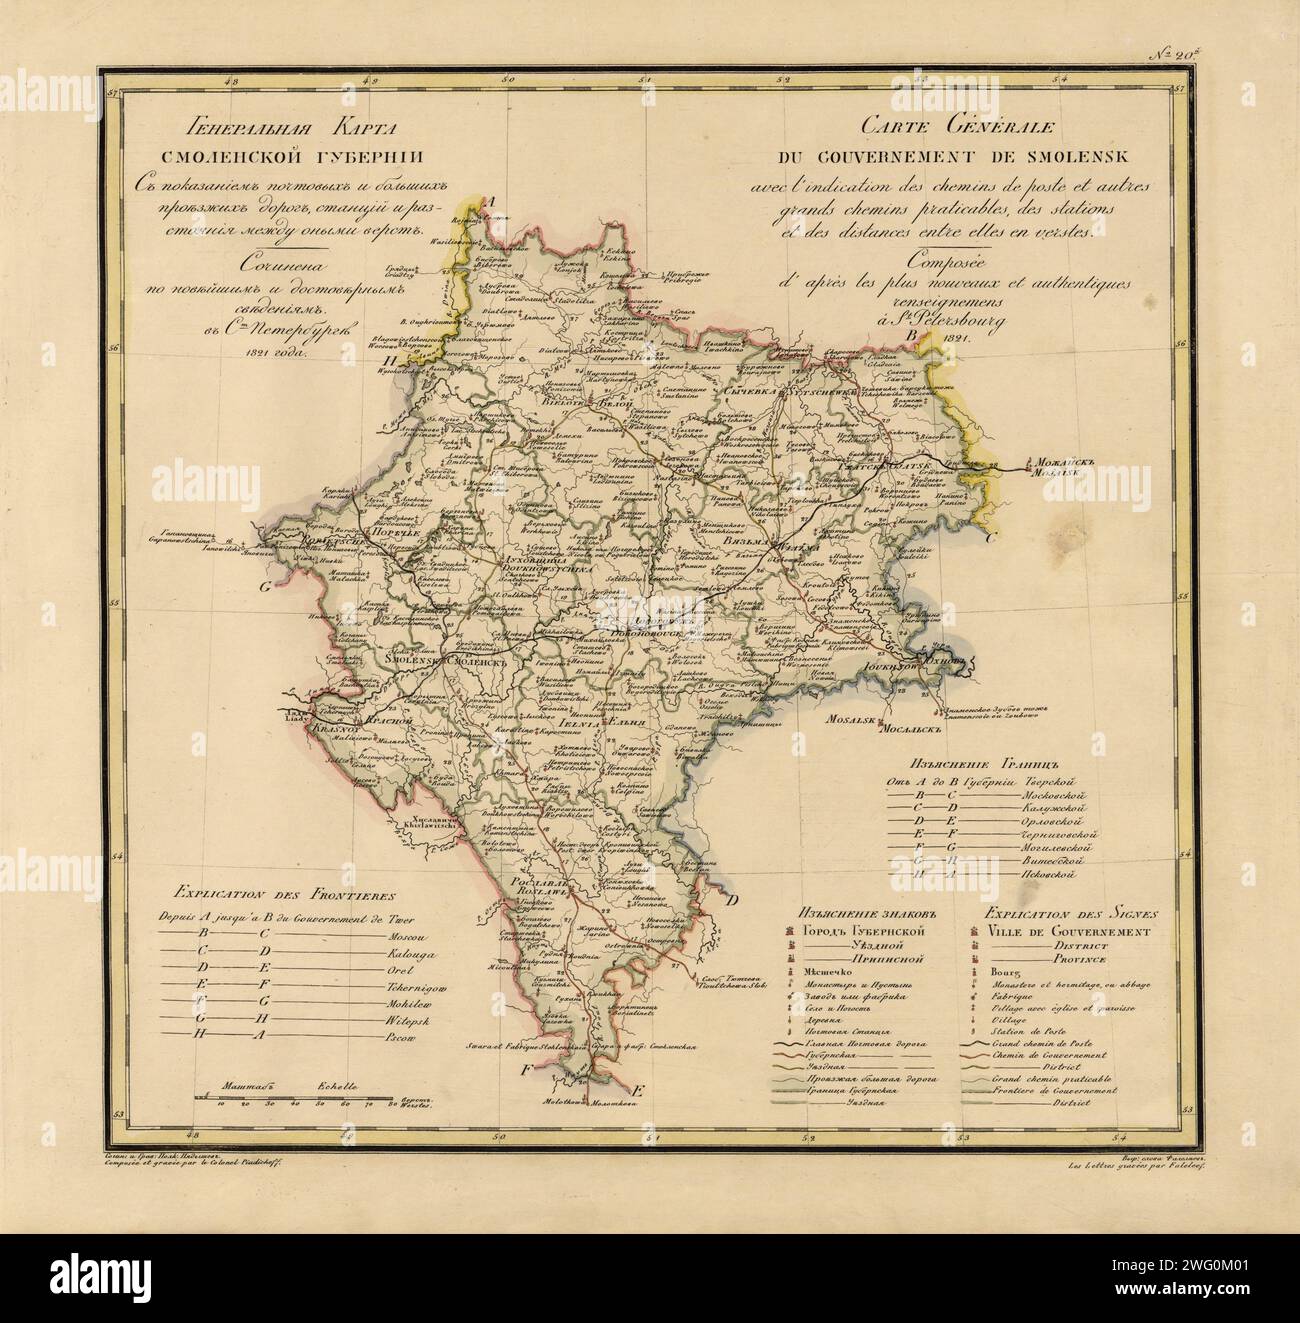 General Map of Moscow Province: Showing Postal and Major Roads, Stations and the Distance in Versts between Them, 1821. This 1821 map of Smolensk Provinceis from a larger work,Geograficheskii atlas Rossiiskoi imperii, tsarstva Pol'skogo i velikogo kniazhestva Finliandskogo(Geographical atlas of the Russian Empire, the Kingdom of Poland, and the Grand Duchy of Finland), containing 60 maps of the Russian Empire. Compiled and engraved by Colonel V.P. Piadyshev, it reflects the detailed mapping carried out by Russian military cartographers in the first quarter of the 19th century. The map shows po Stock Photo